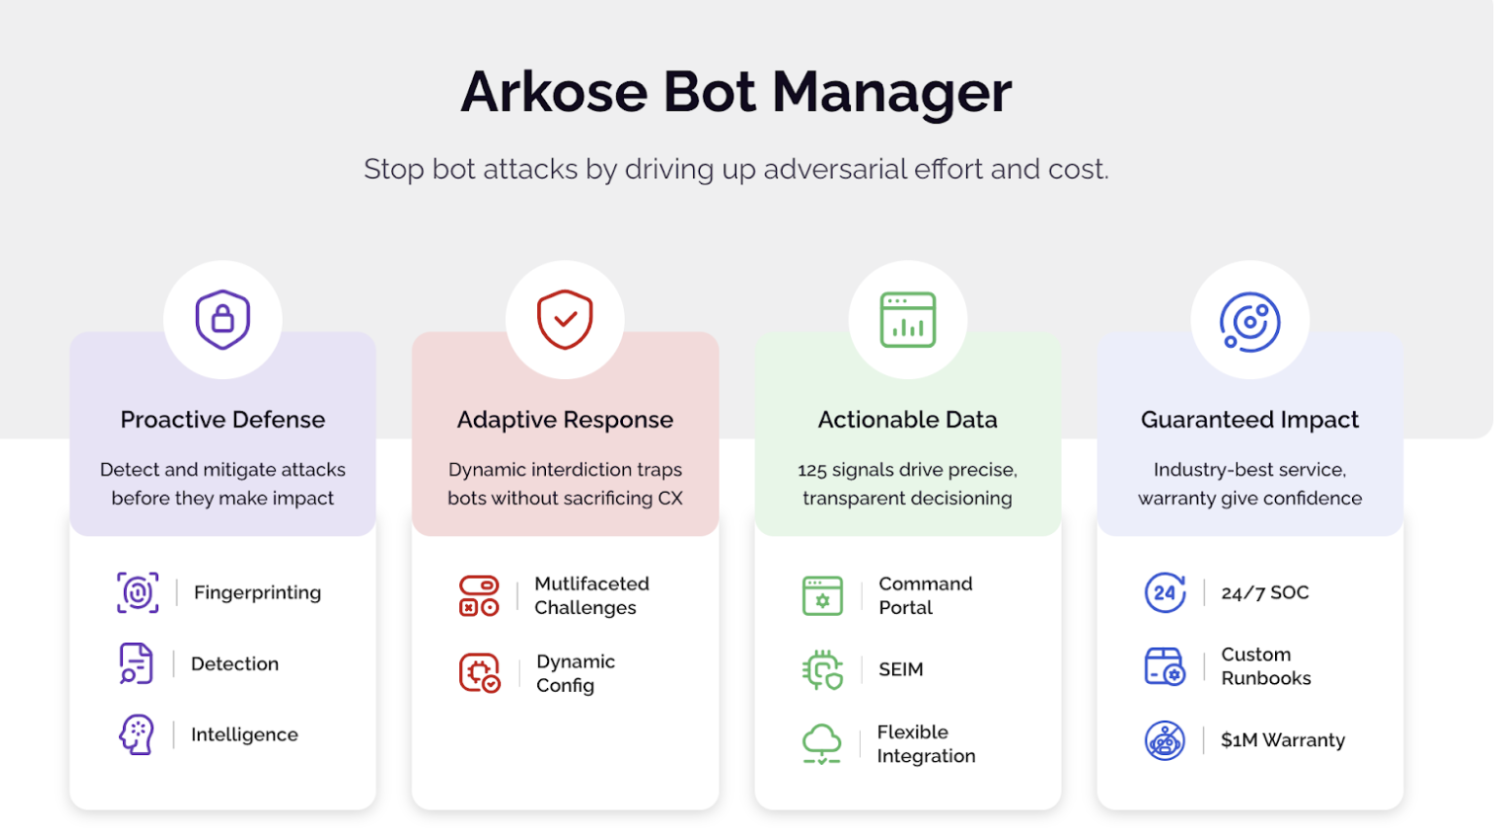 Infographic: Capabilities of Arkose Bot Manager